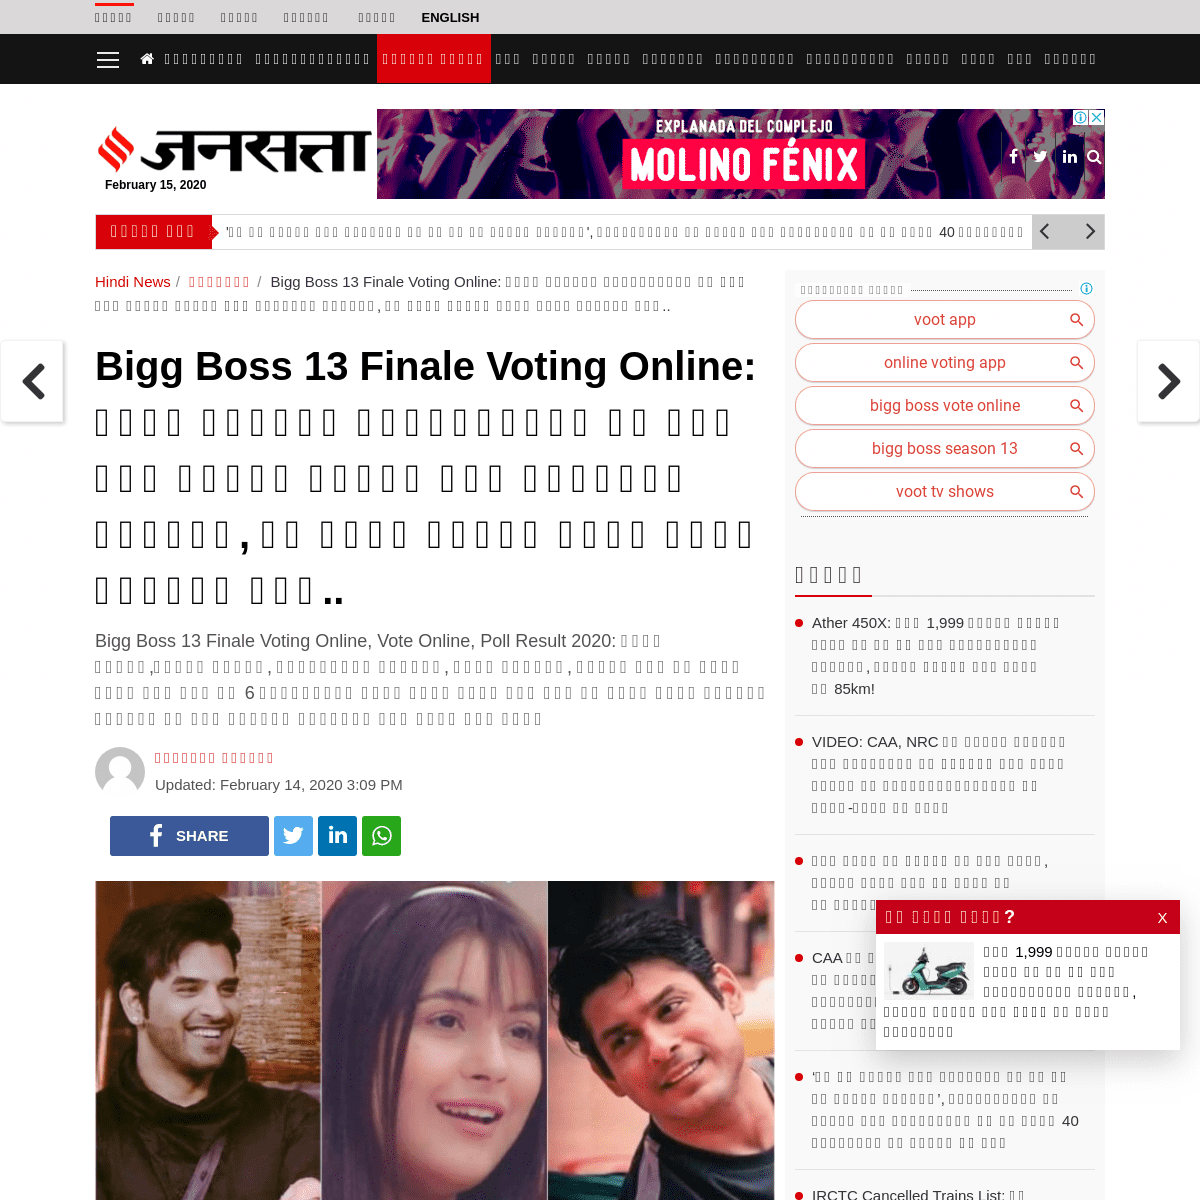 A complete backup of www.jansatta.com/entertainment/bigg-boss-13-finale-voting-online-how-to-vote-bigg-boss-13-in-voot-app-for-a